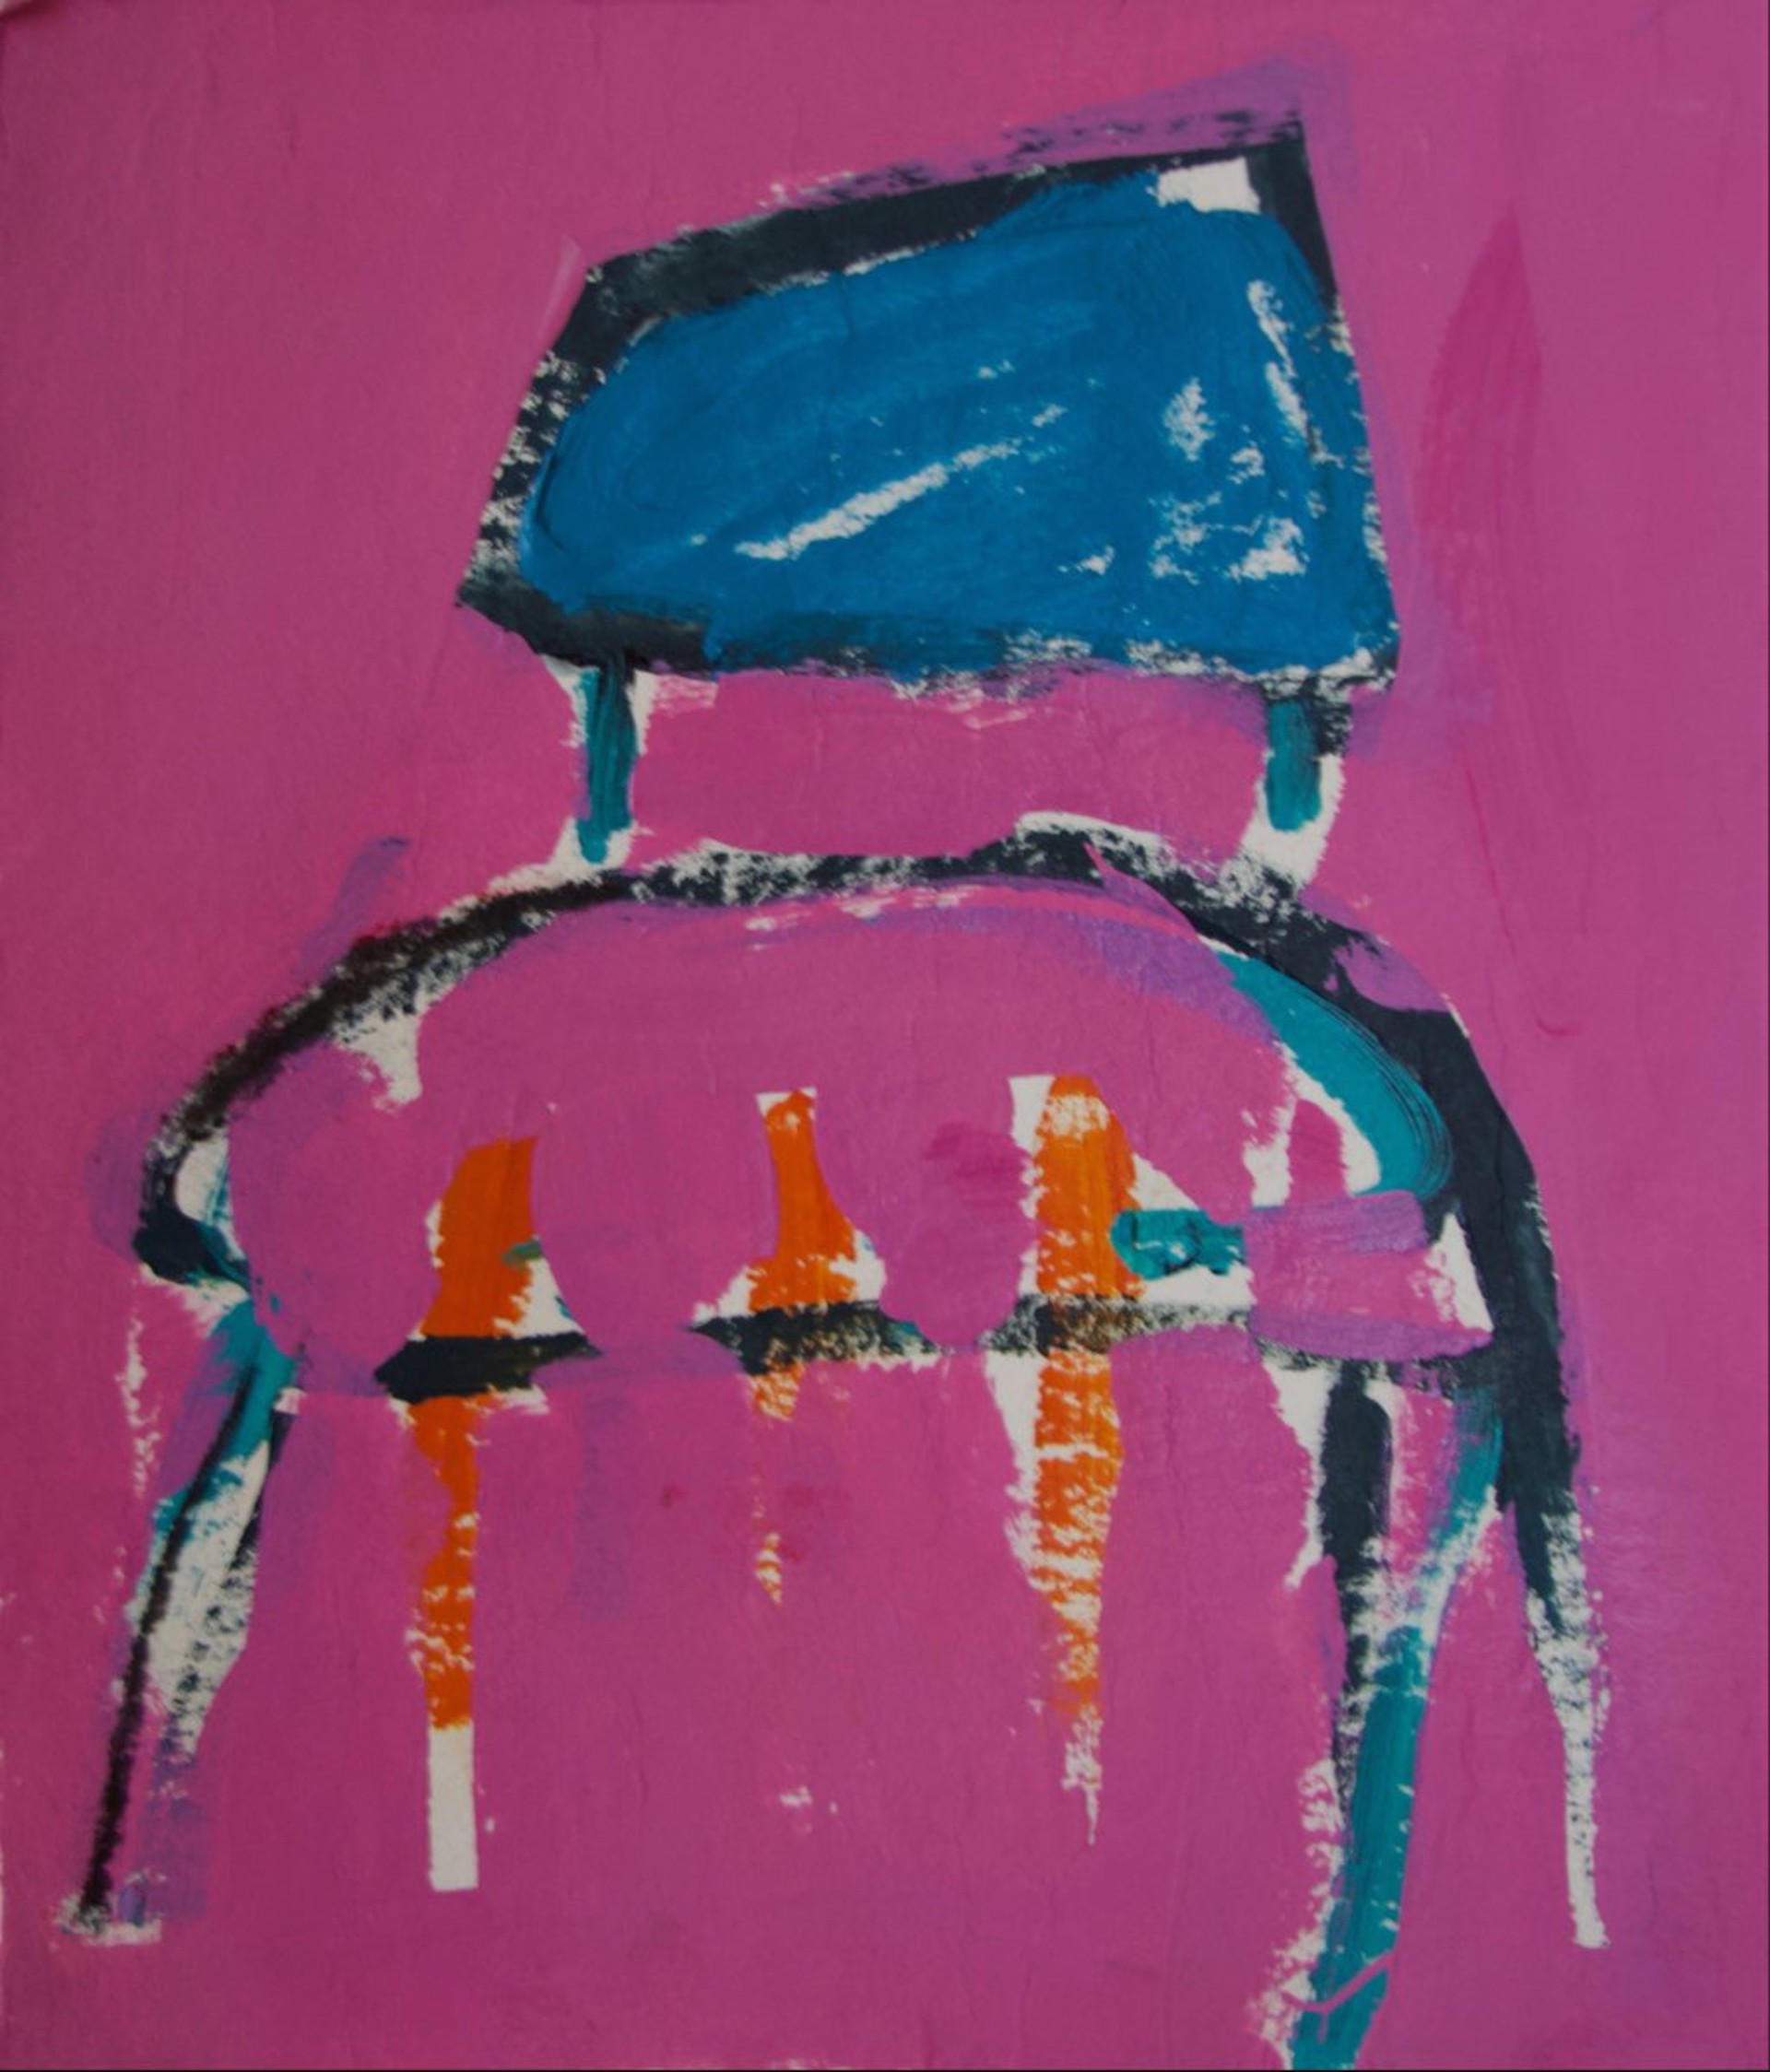 Seated, Chair 197 by Catie Radney